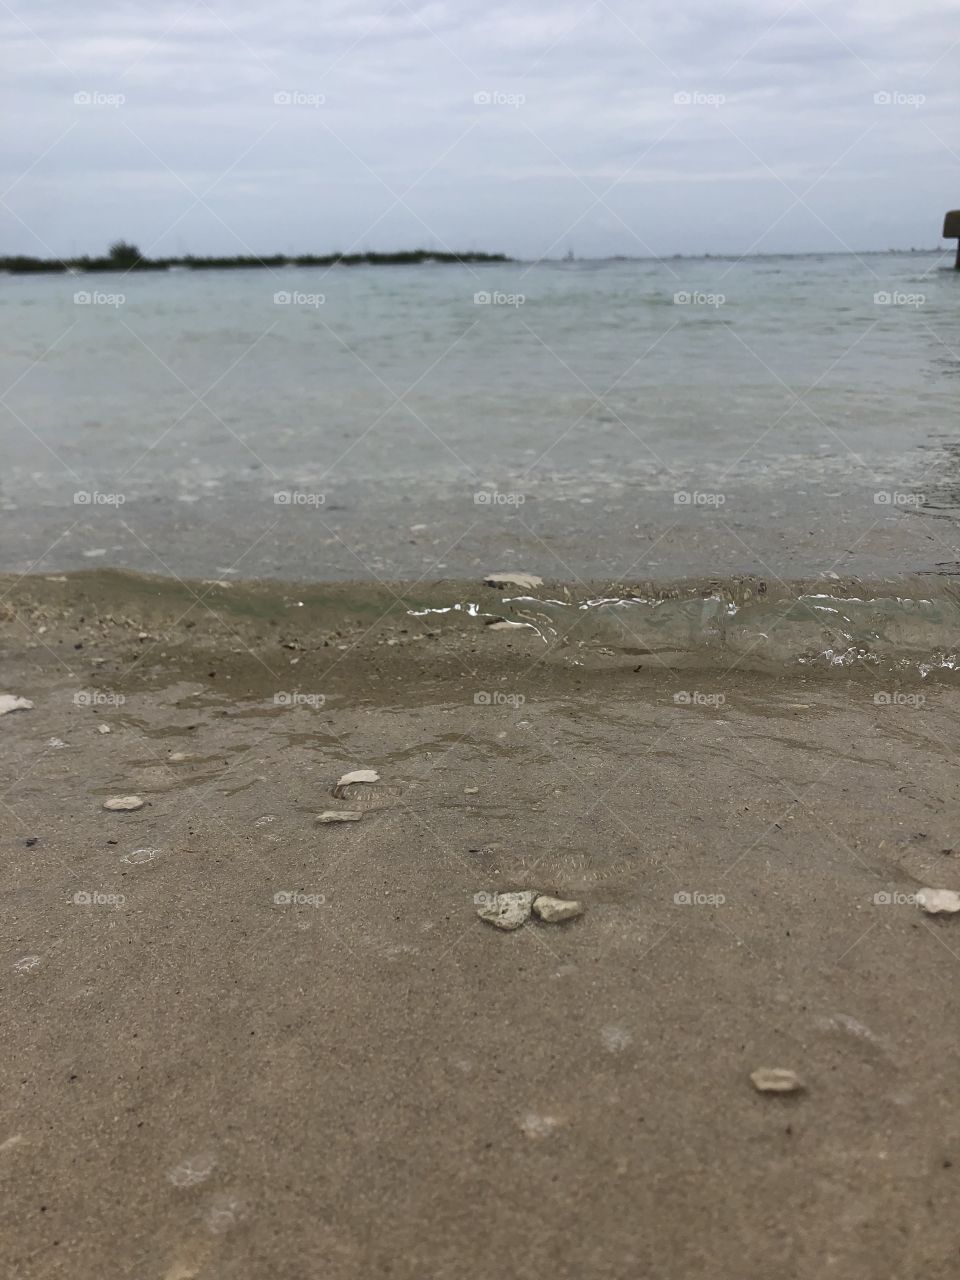 A picture of the clear, translucent water at low tide on Simonton Beach in Key West, FL